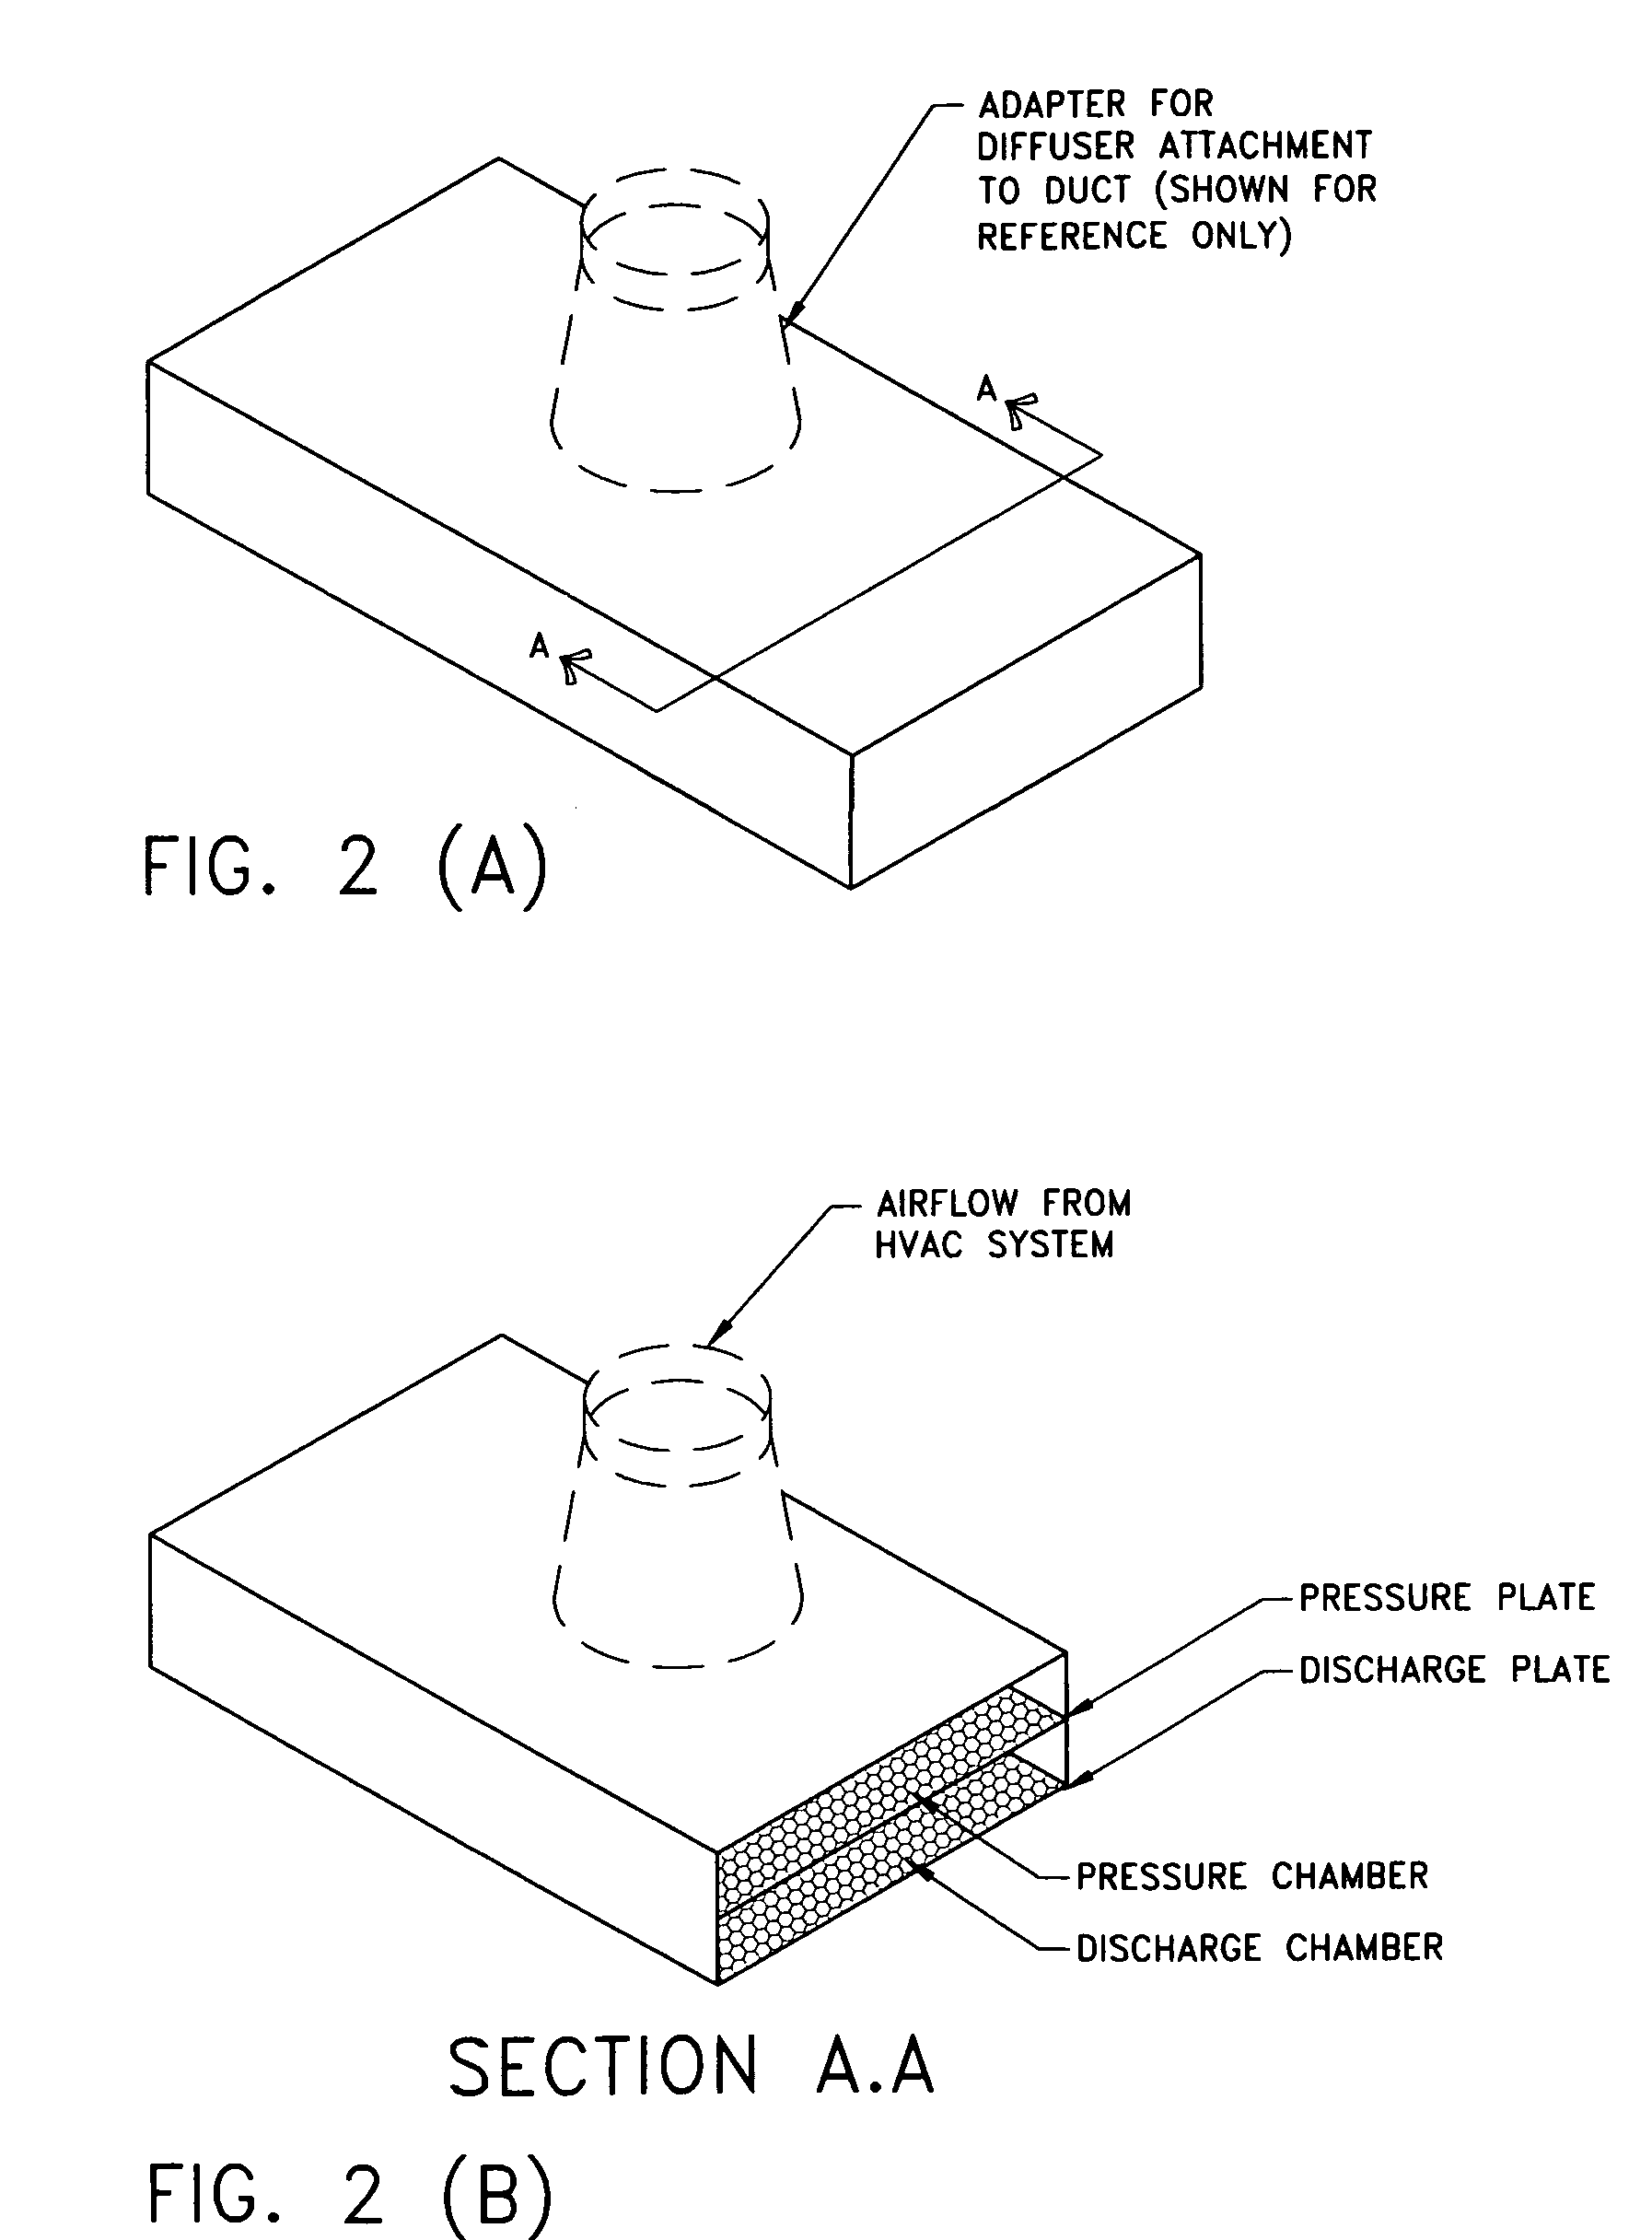 Diffuser assembly for non-turbulent air flow